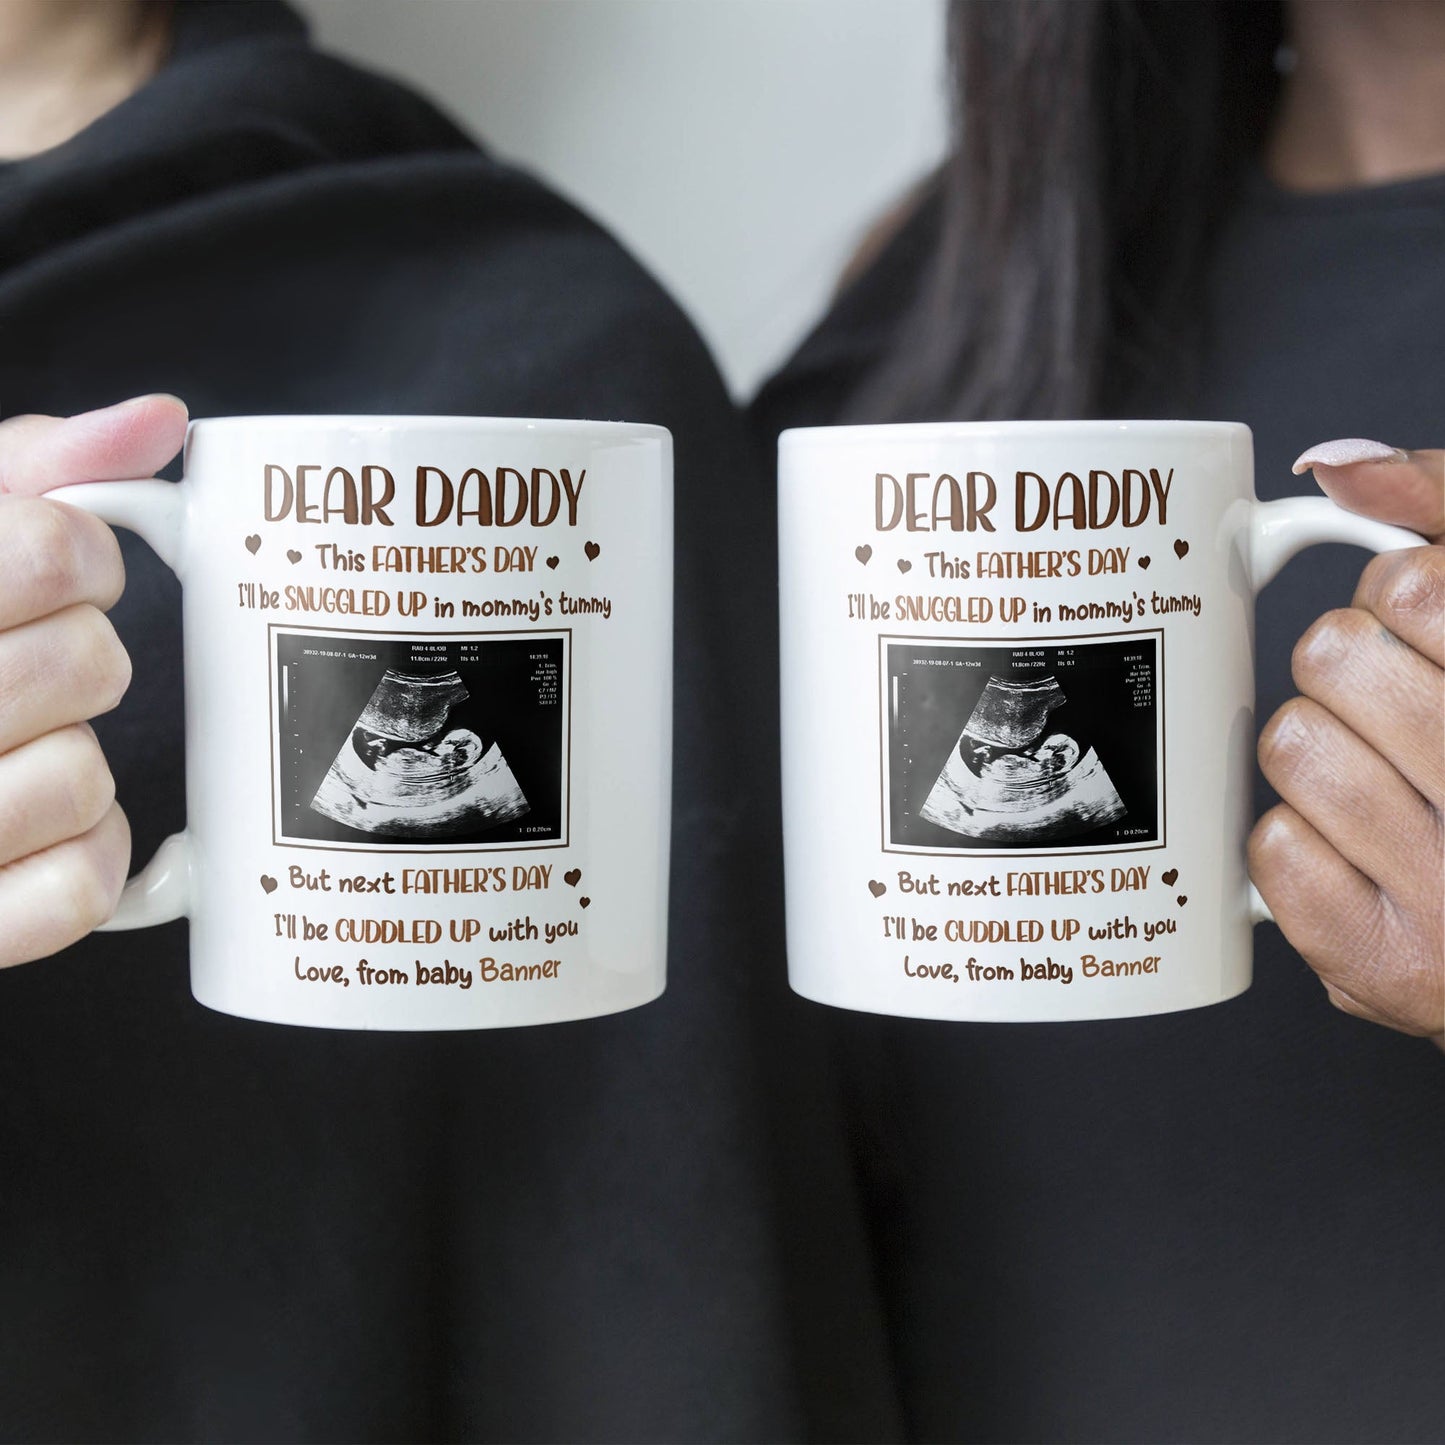 This Father's Day, I'll Be Snuggled Up In Mommy's Tummy - Personalized mug - Father's Day, Birthday, First Father's Day Gift For For Daddy To Be, Gift For Dad, Papa, Father, Daddy - From Bump, Baby